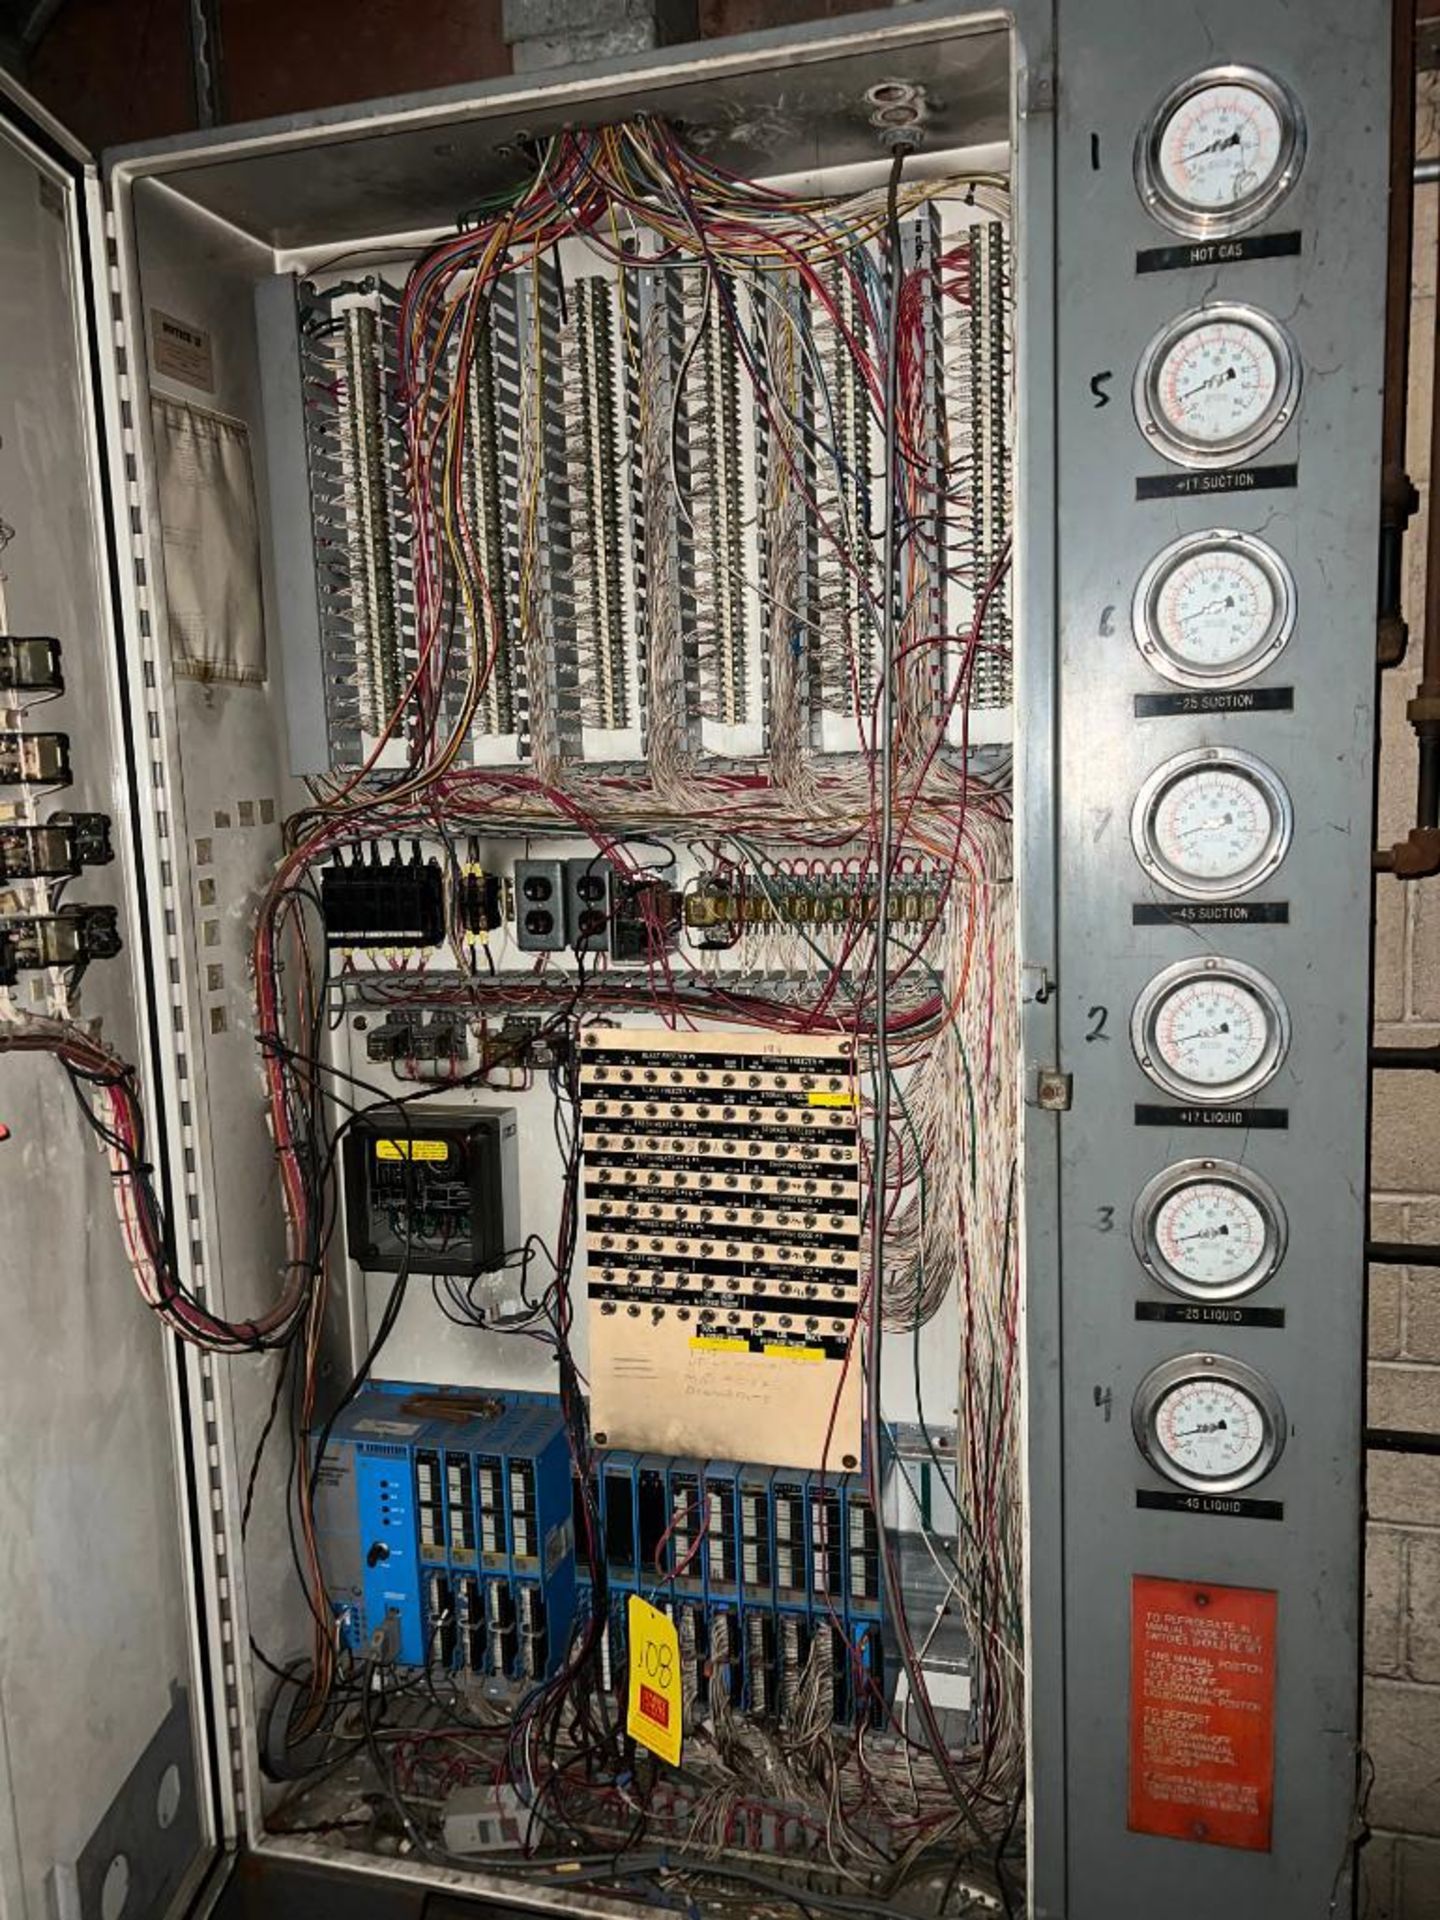 Westinghouse Programable Controller PLC, Model: PC1200 with (13) I/O Cards, Switches, Gauges and Enc